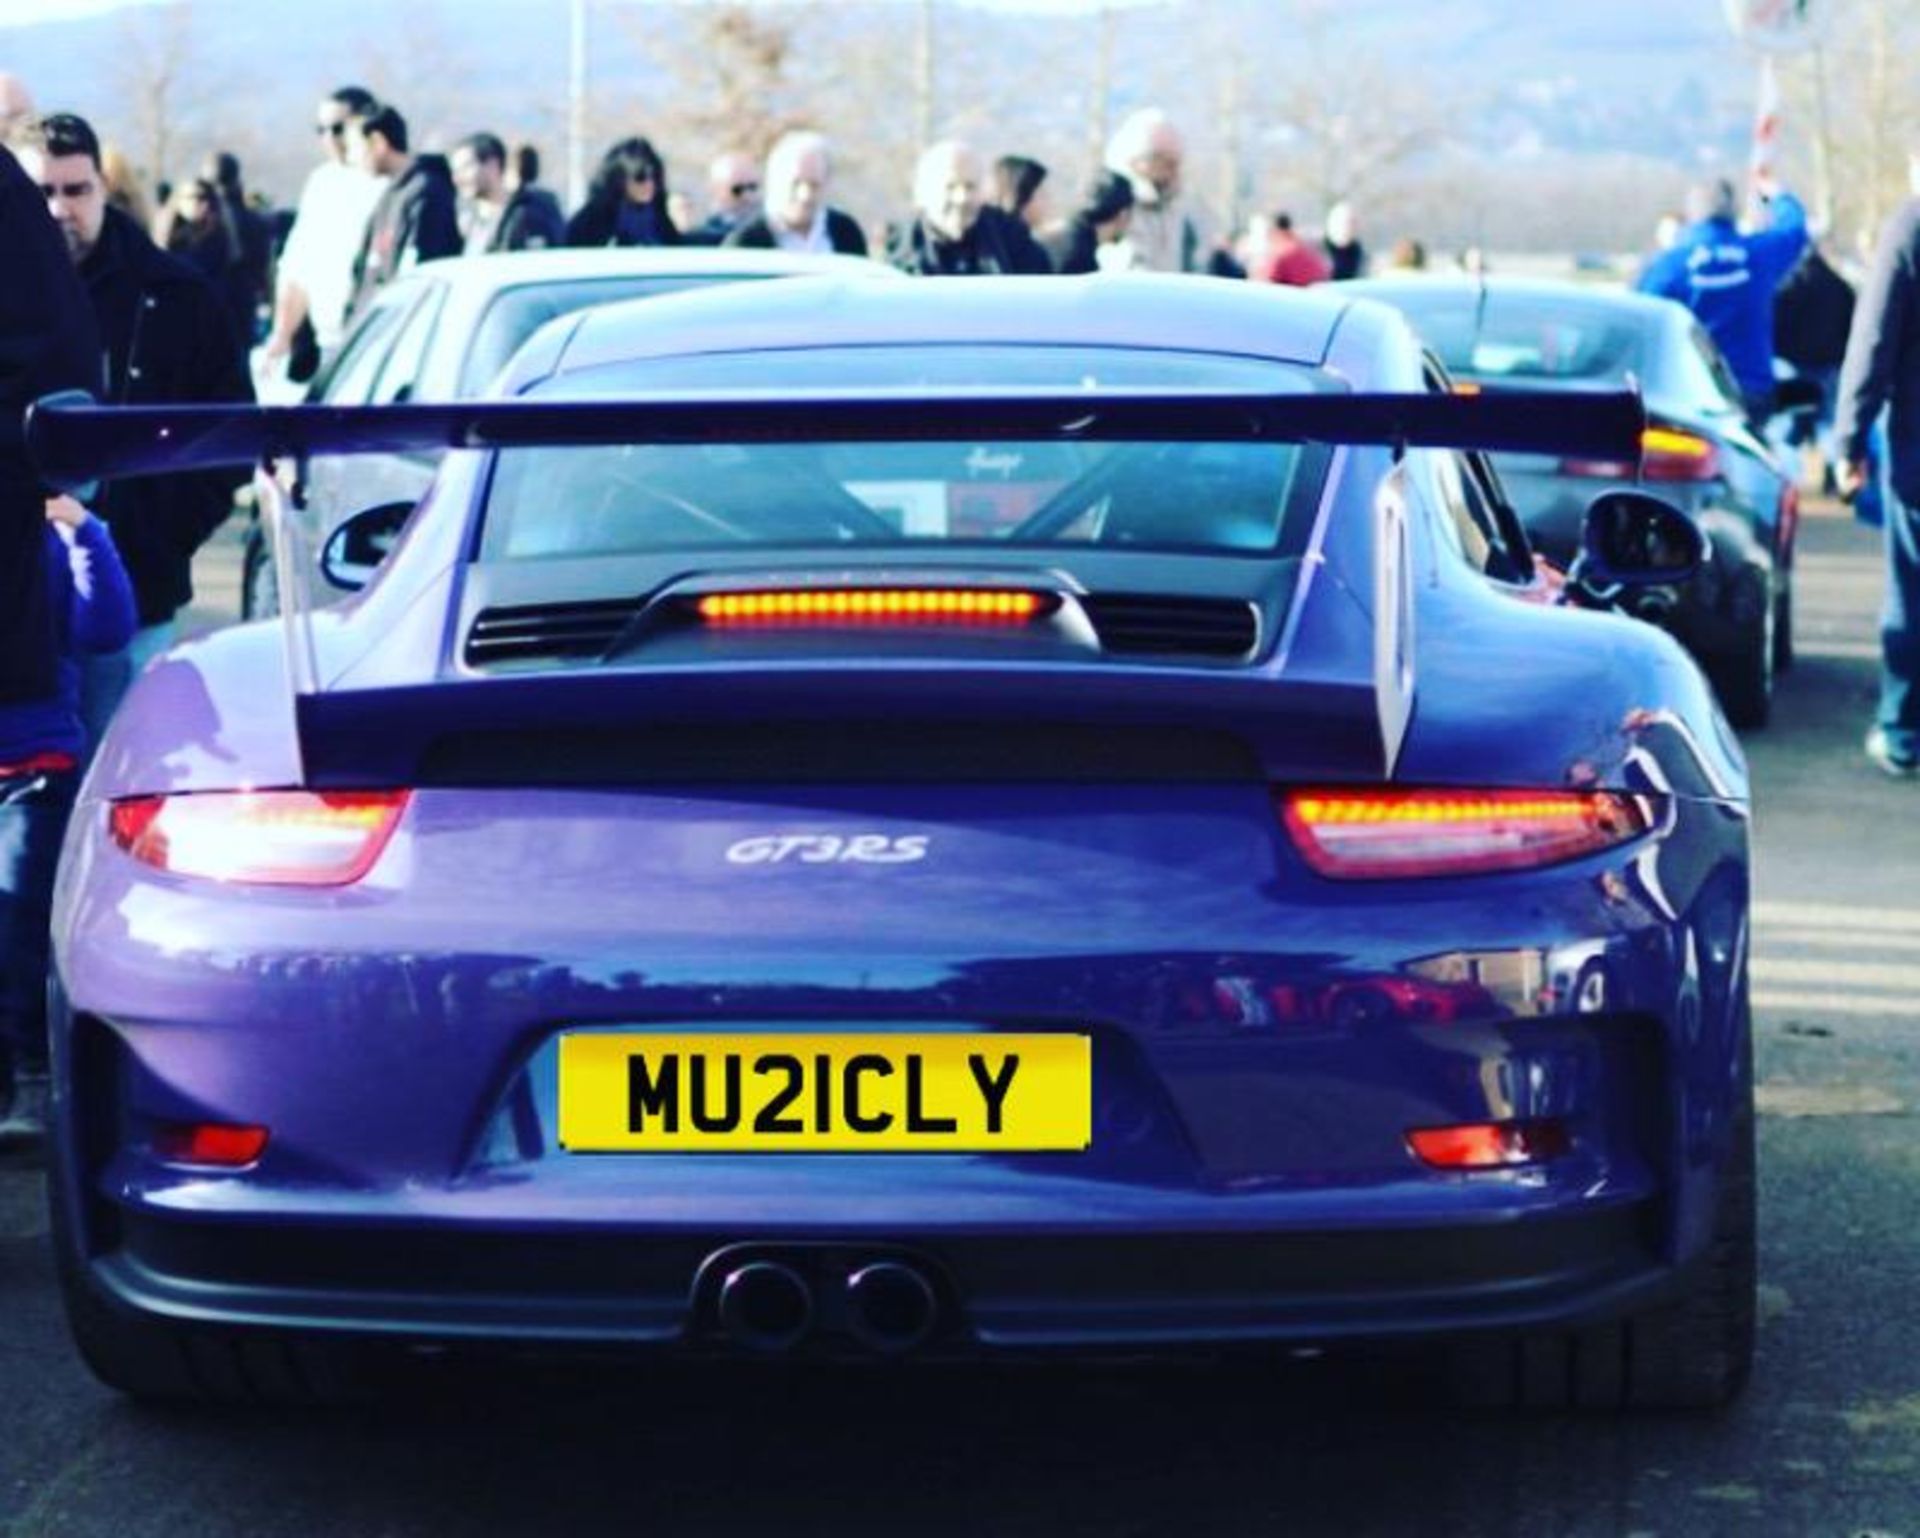 MUSIC Cherished Private Number Plate *MU21CLY*